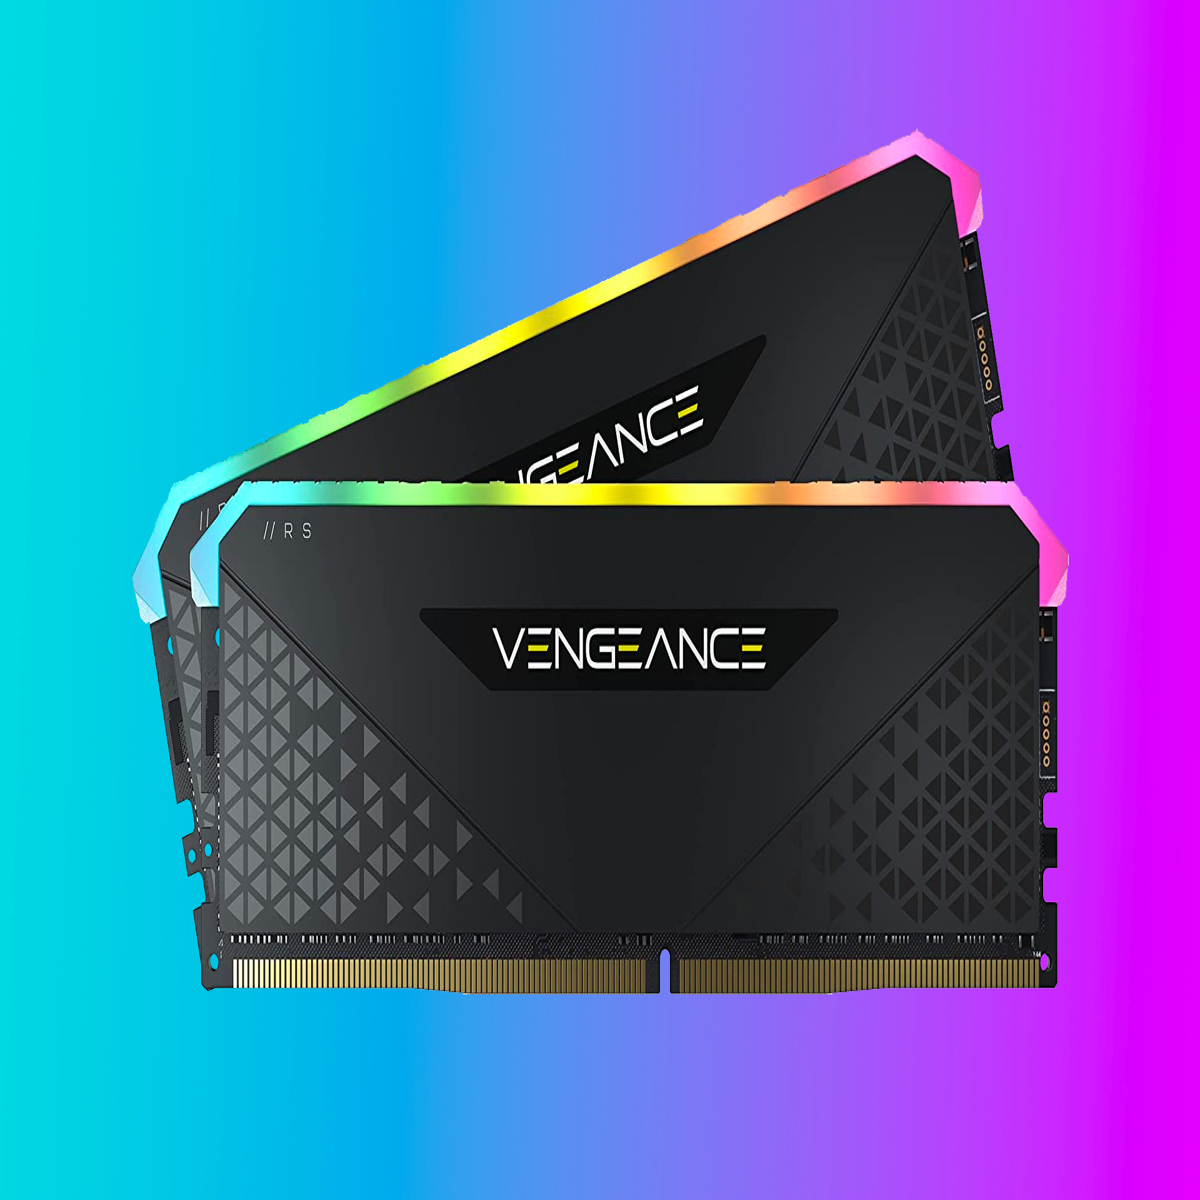 Grab 32GB of solid RS Vengeance £79 RGB RAM from Corsair for Amazon DDR4